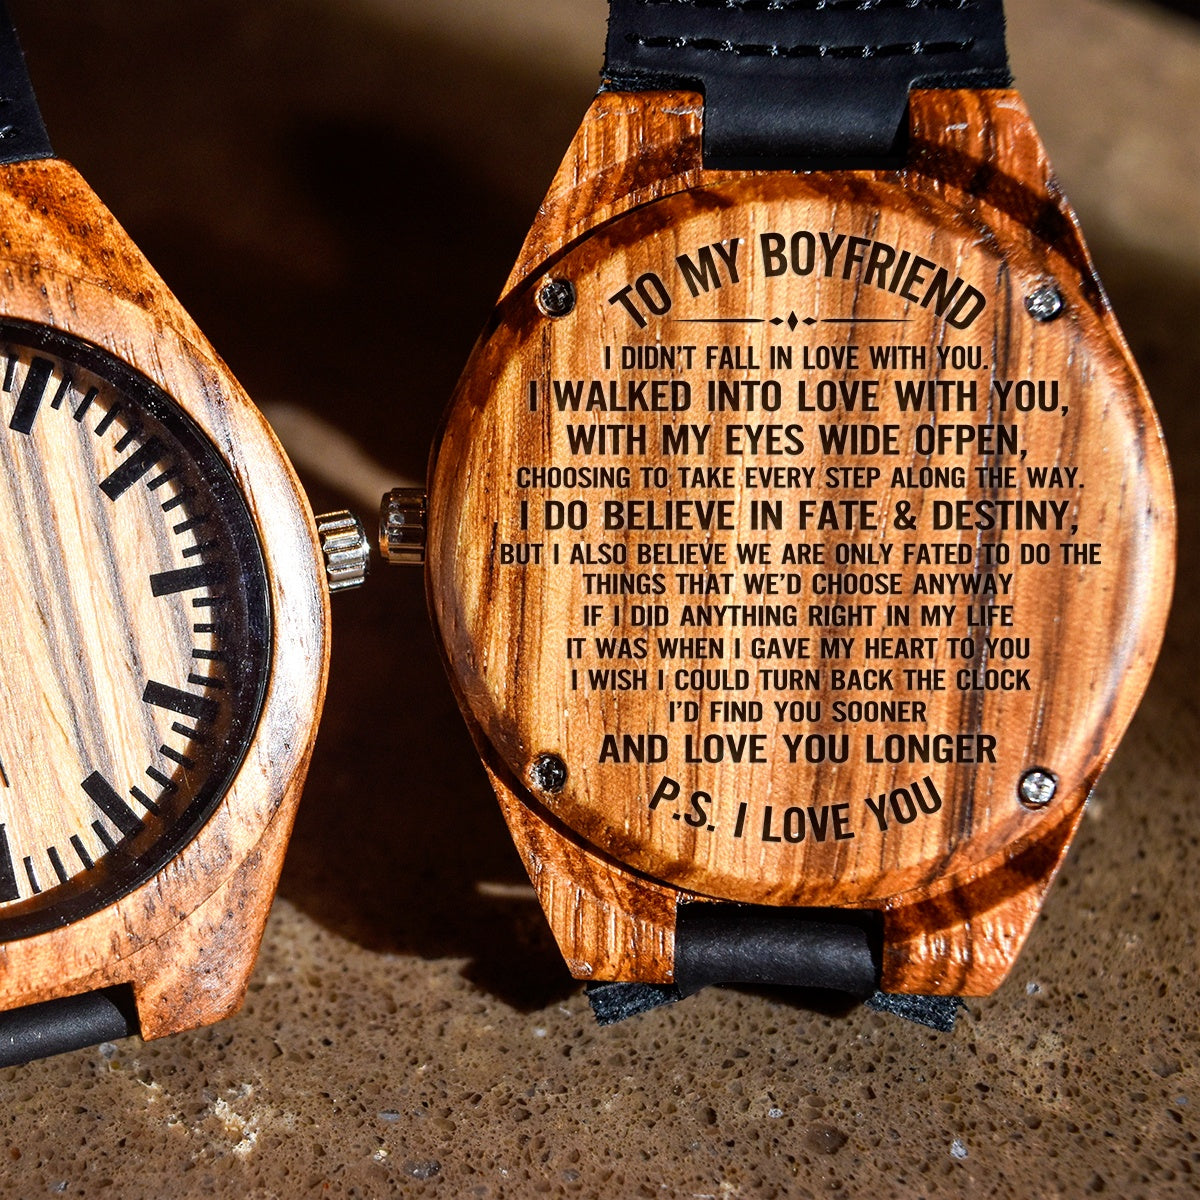 To My Boyfriend I Didn't Fall In Love With You - Engraved Zebra Watch